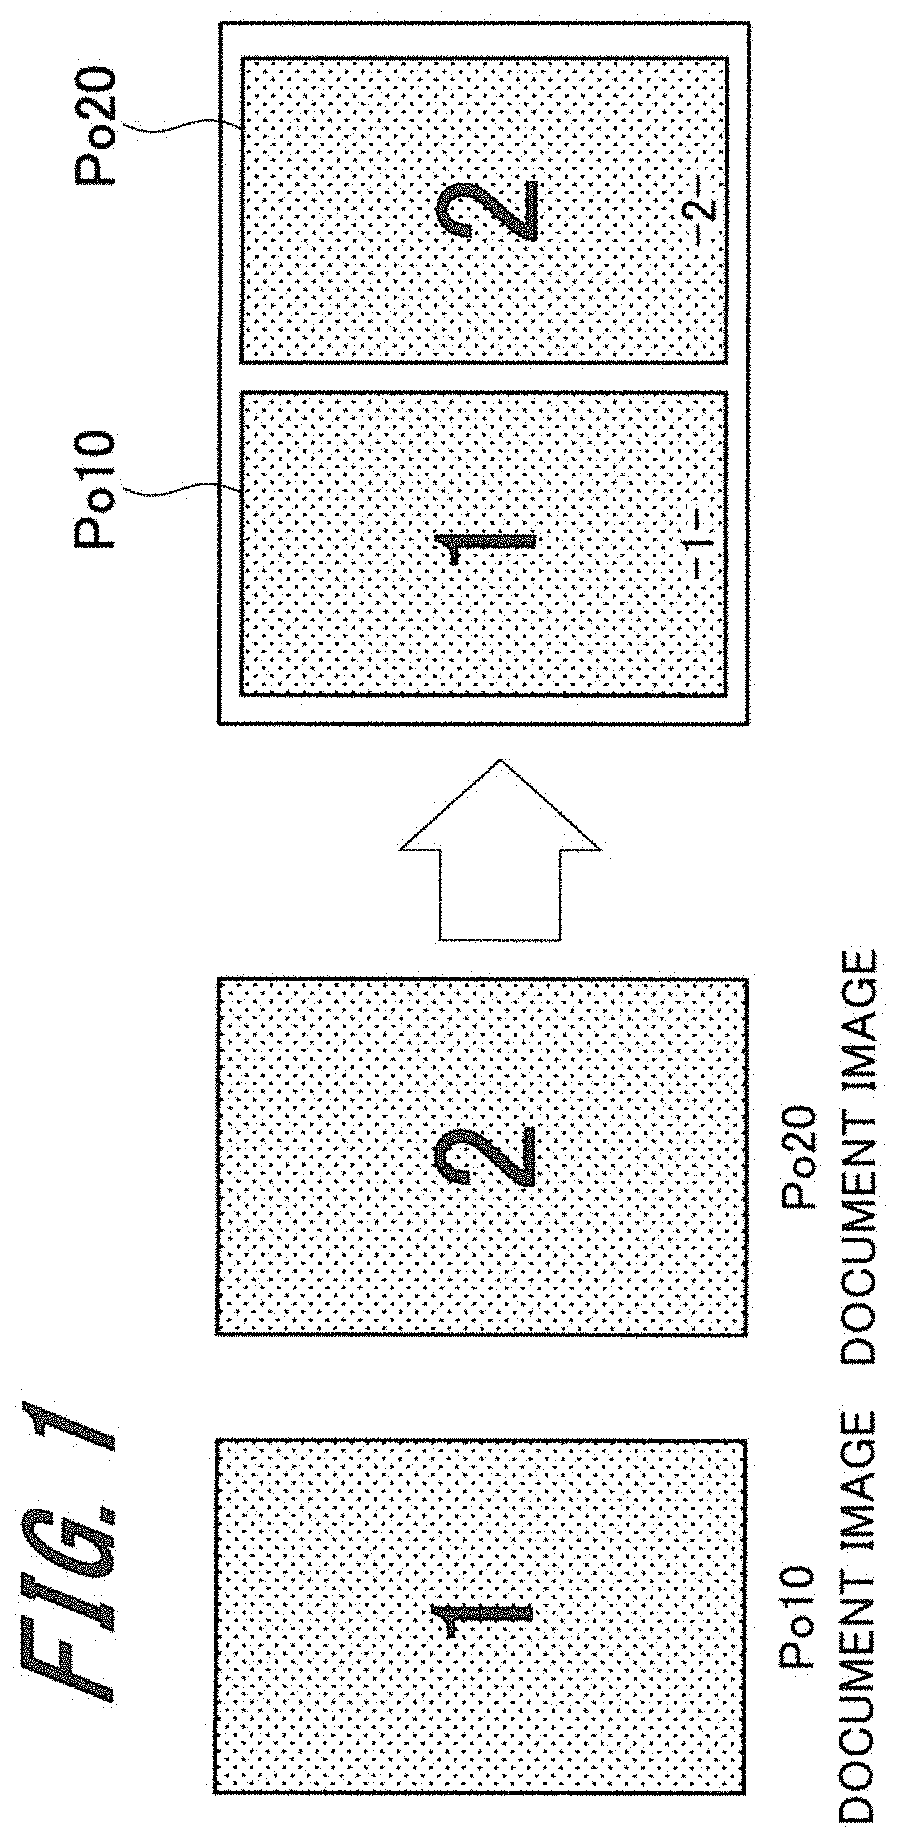 Image inspection device, image formation device, image inspection method, and non-transitory recording medium storing a computer readable program